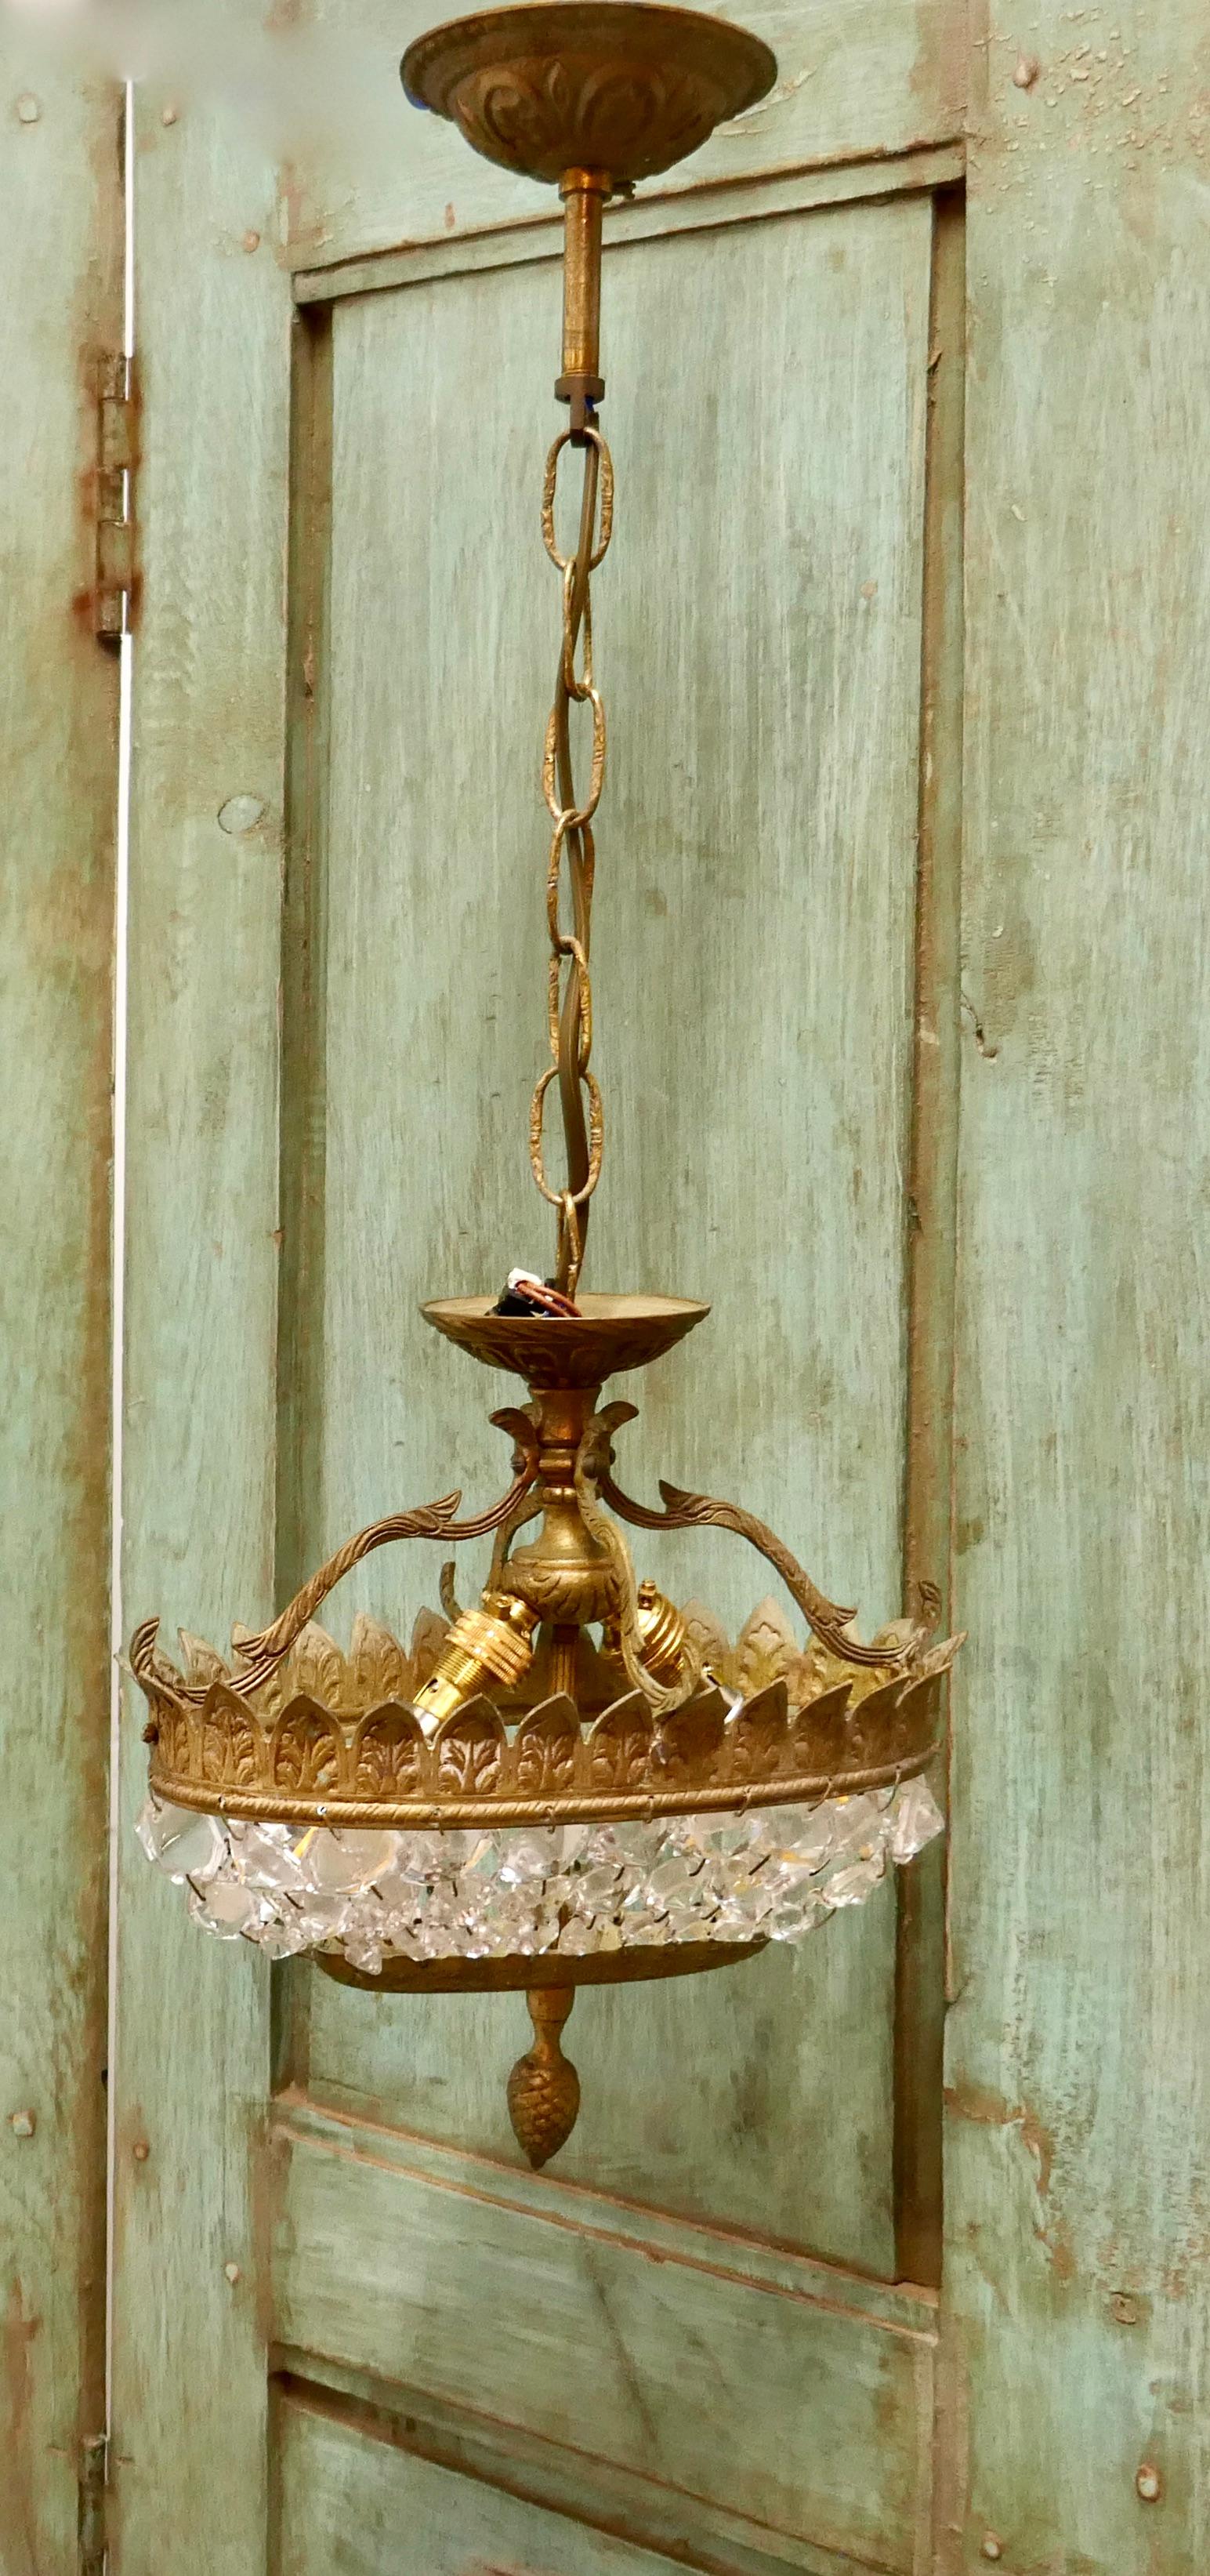 Unusual oval shaped French Empire style basket chandelier

This piece is an unusual oval shape, it has a decorative aged brass frame hung with chains of cut large crystal beads gathering in an oval at the base, it has a brass ceiling rose 
The